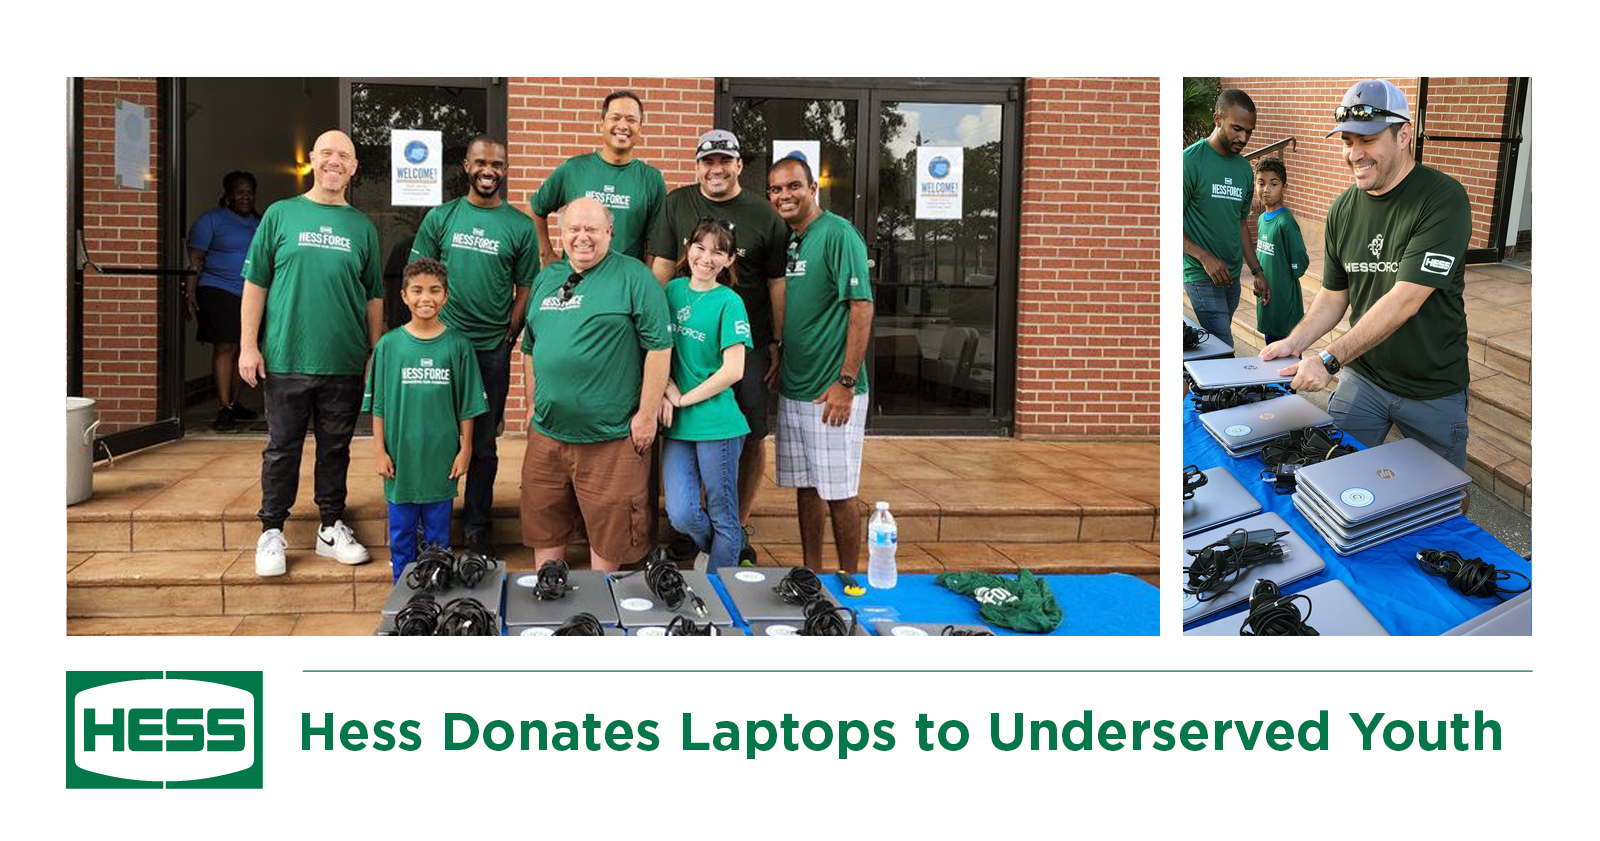 Hess Donates Laptops to Underserved Youth